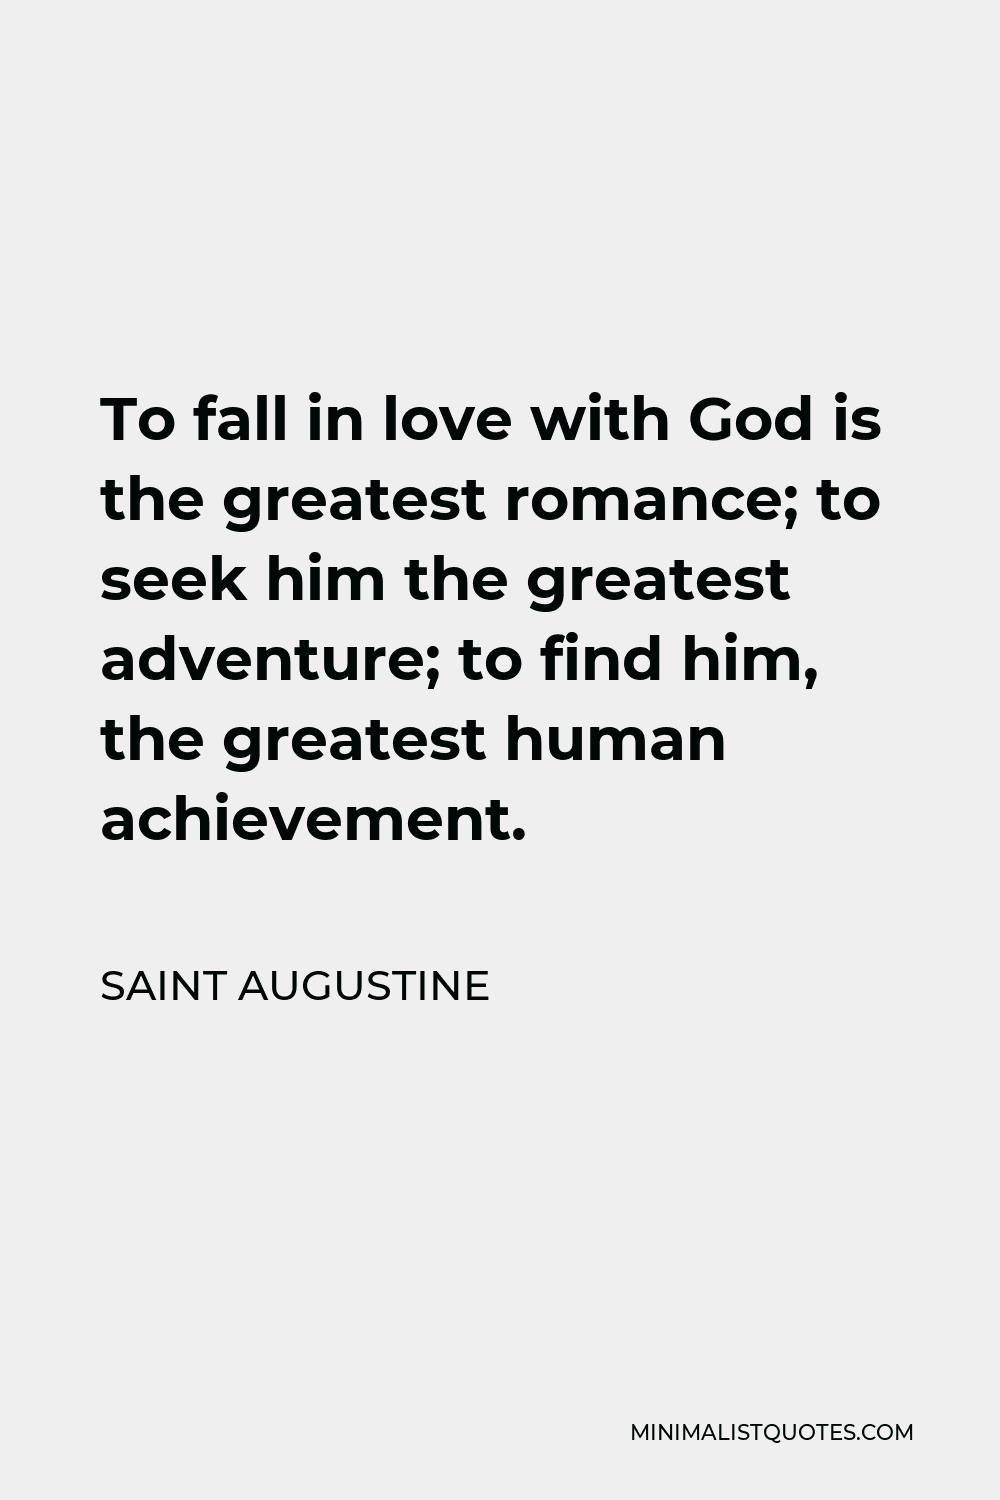 Saint Augustine Quote - To fall in love with God is the greatest romance; to seek him the greatest adventure; to find him, the greatest human achievement.